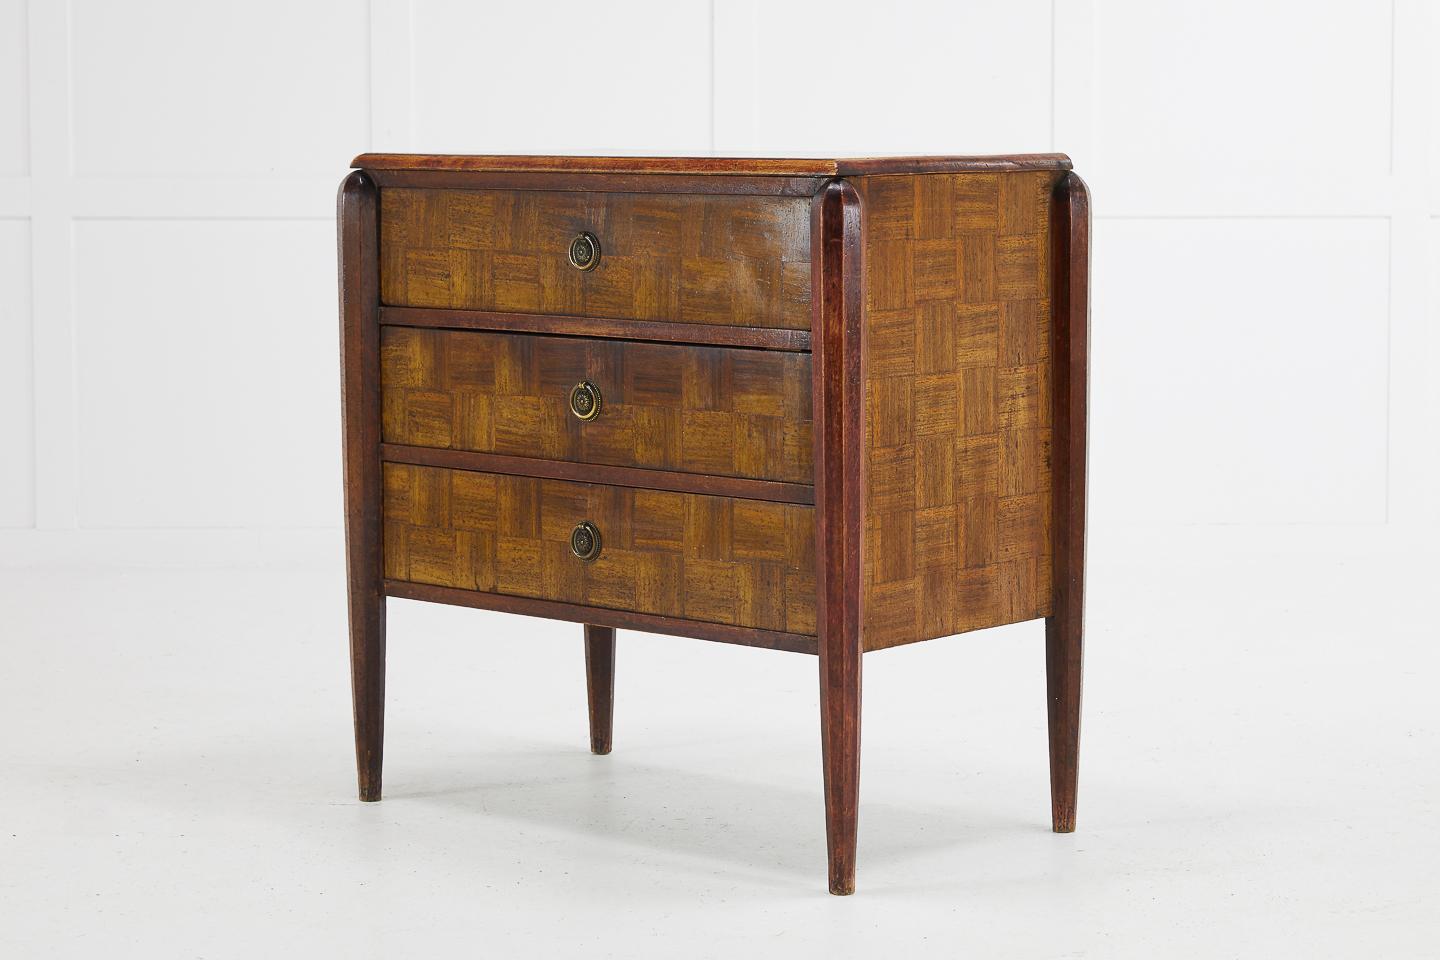 1930s French parquetry commode of small proportion and nice original color.